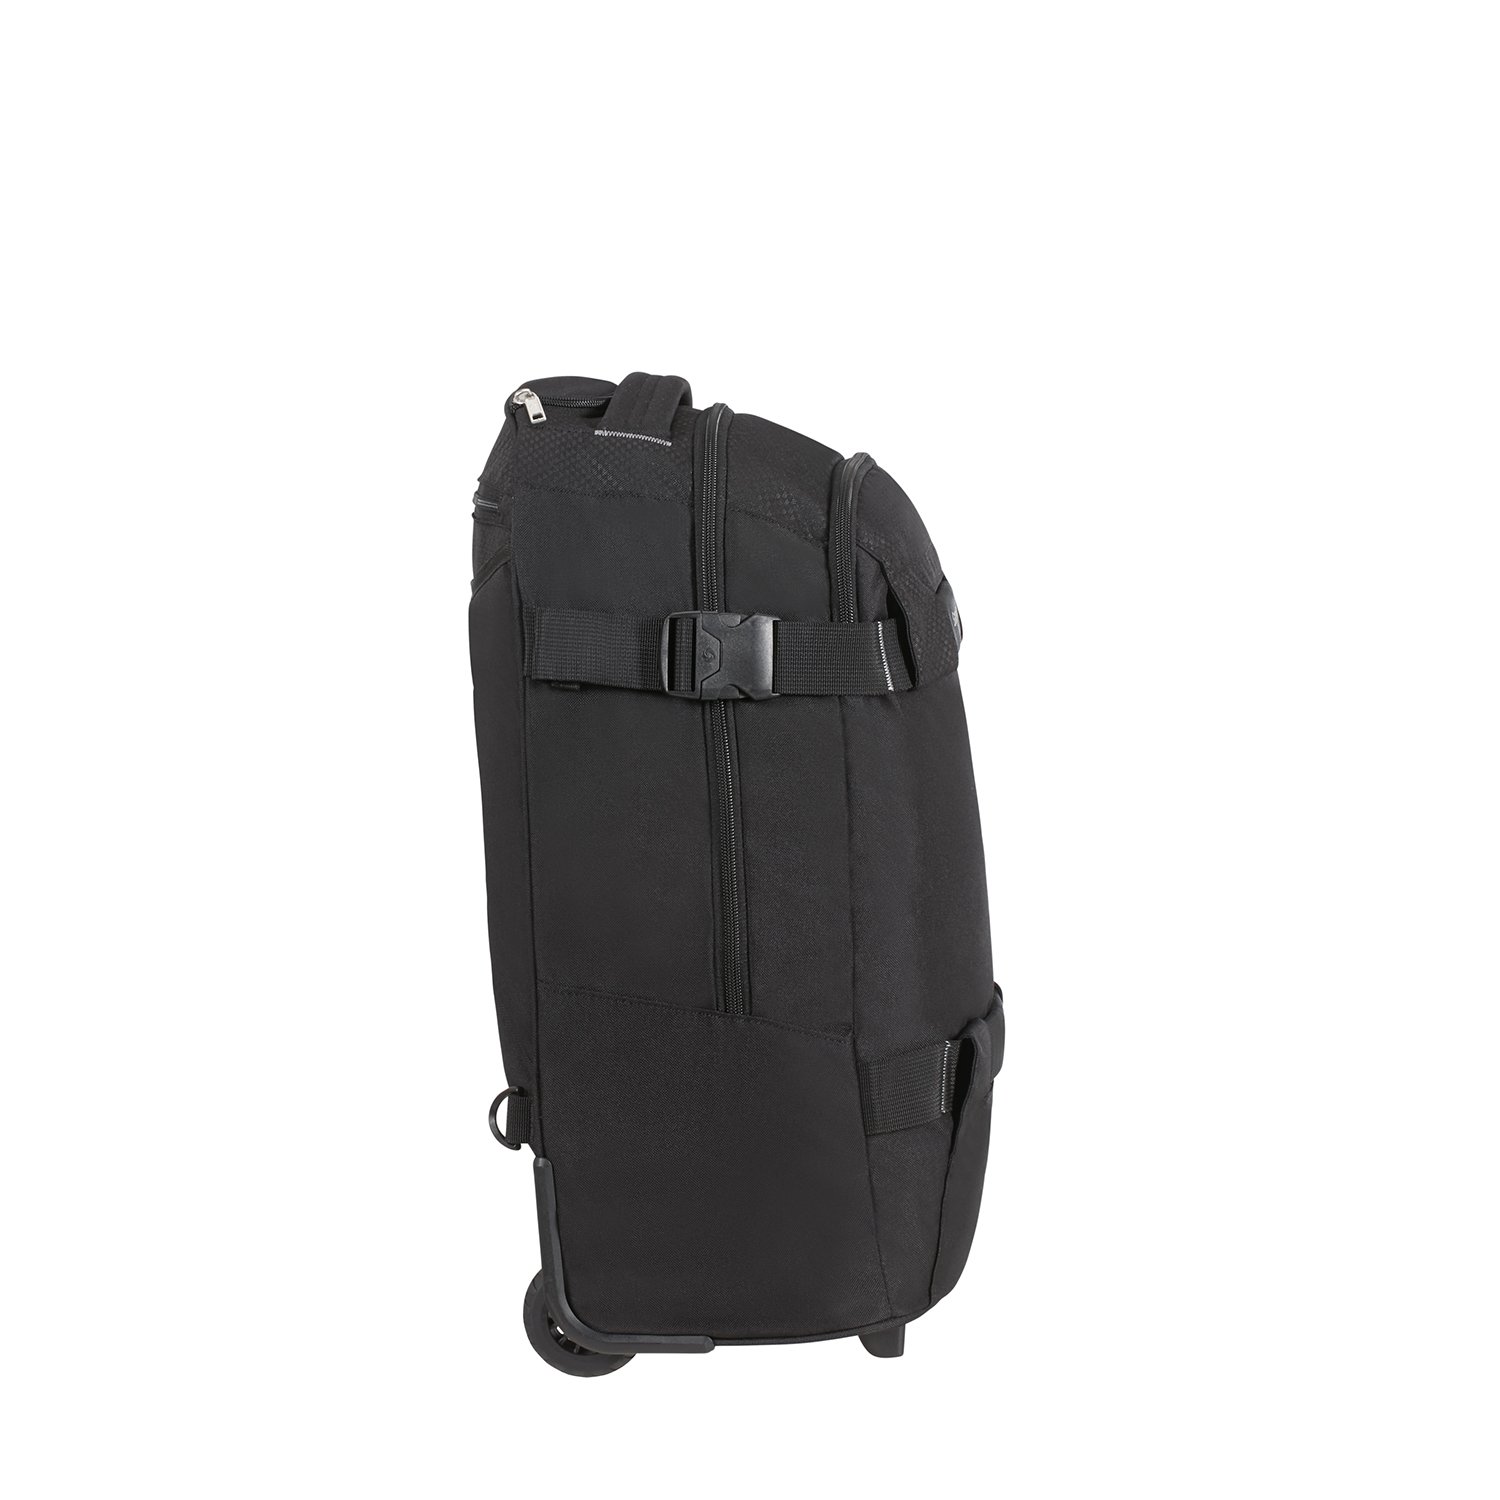 SONORA-LAPTOP BACKPACK/WH 55/20 SKA1-007-SF000*09